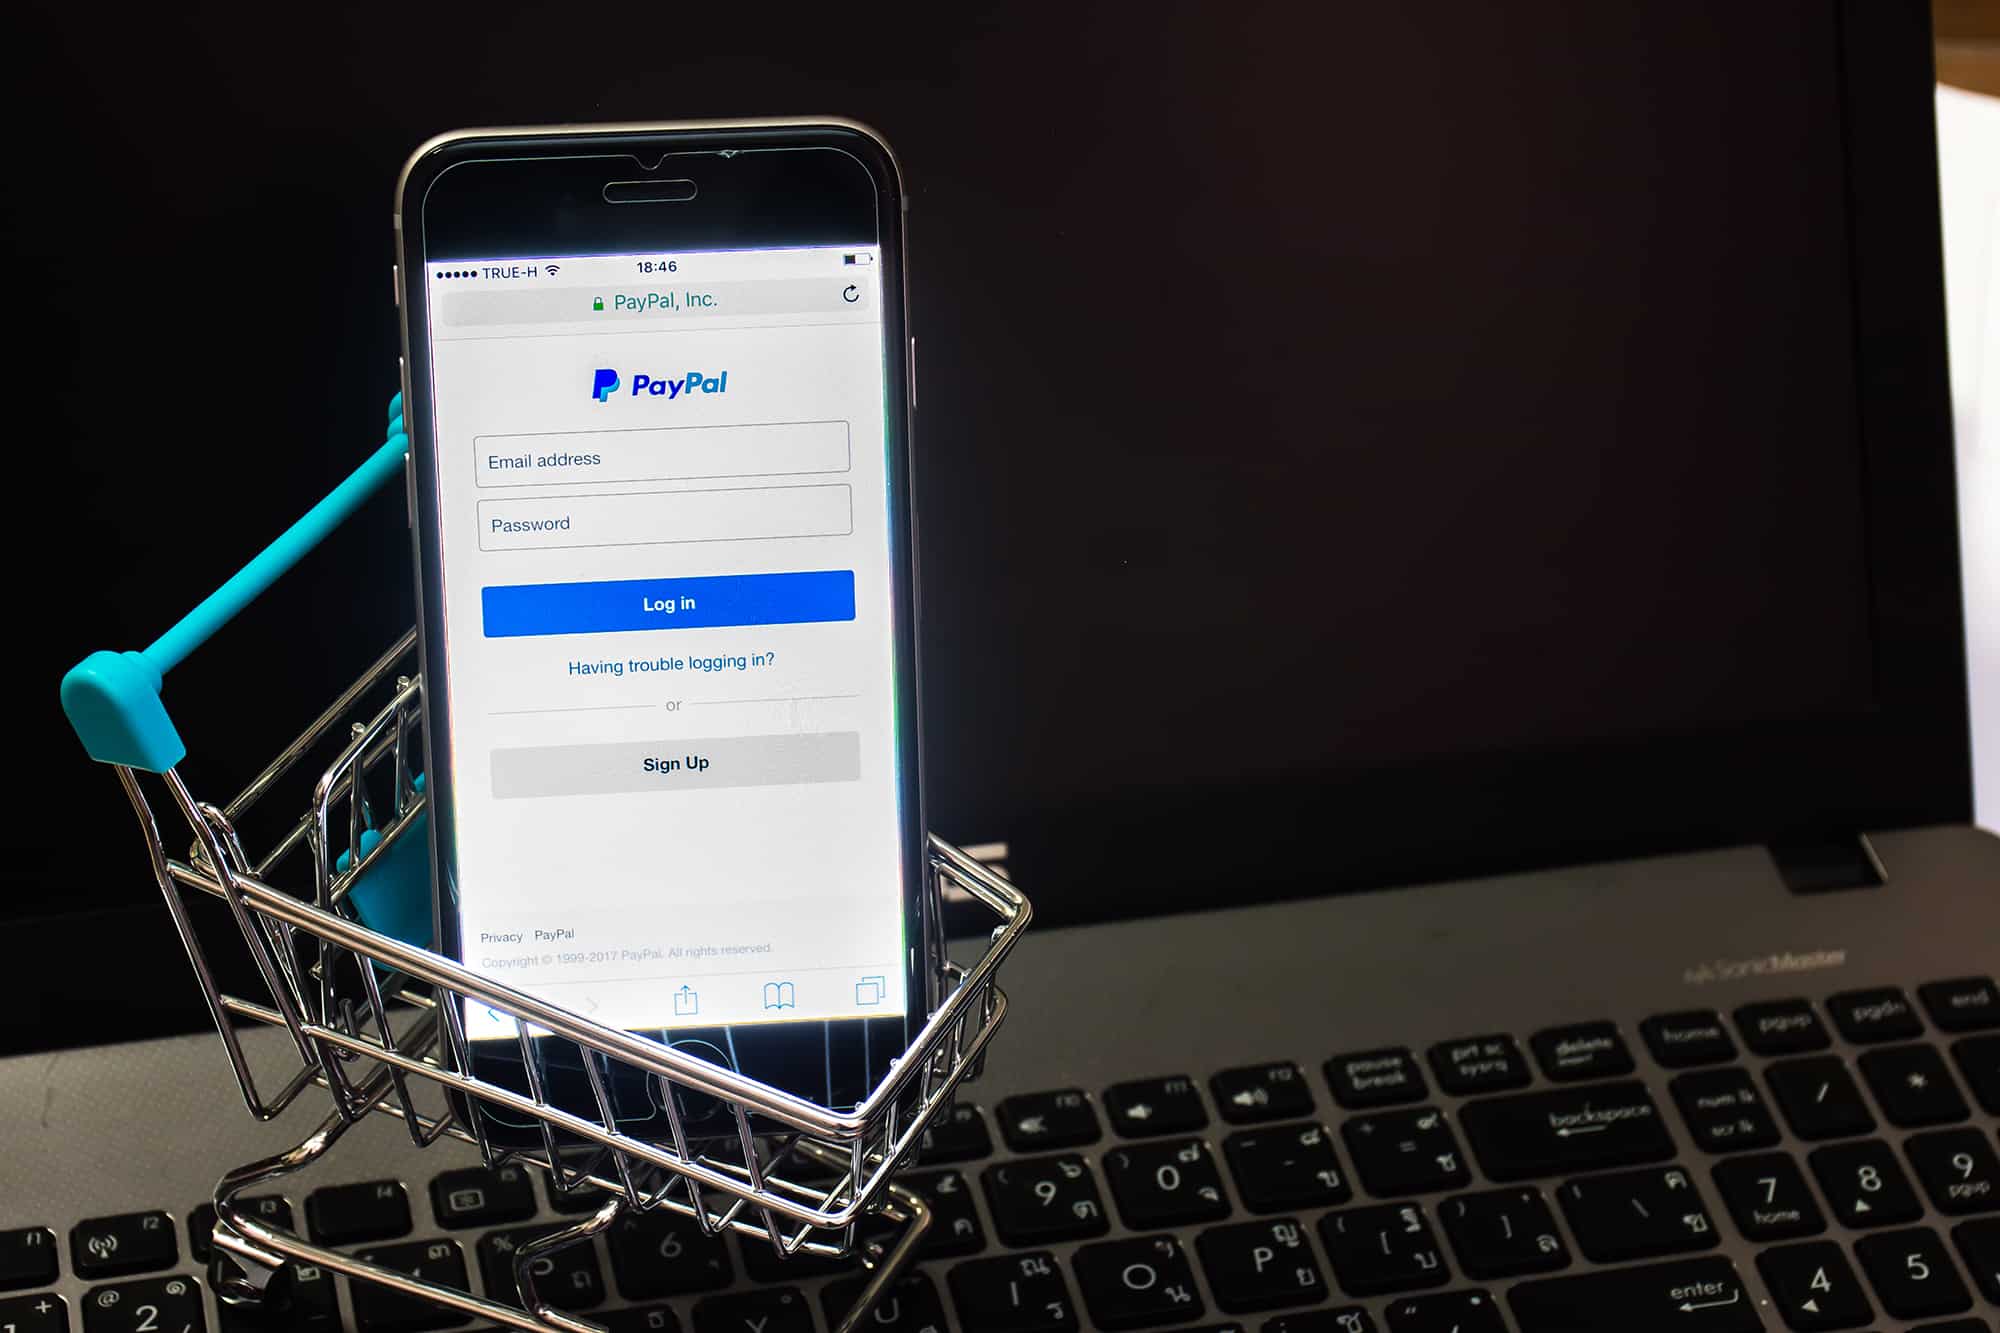 PayPal screen on mobile phone with shopping cart